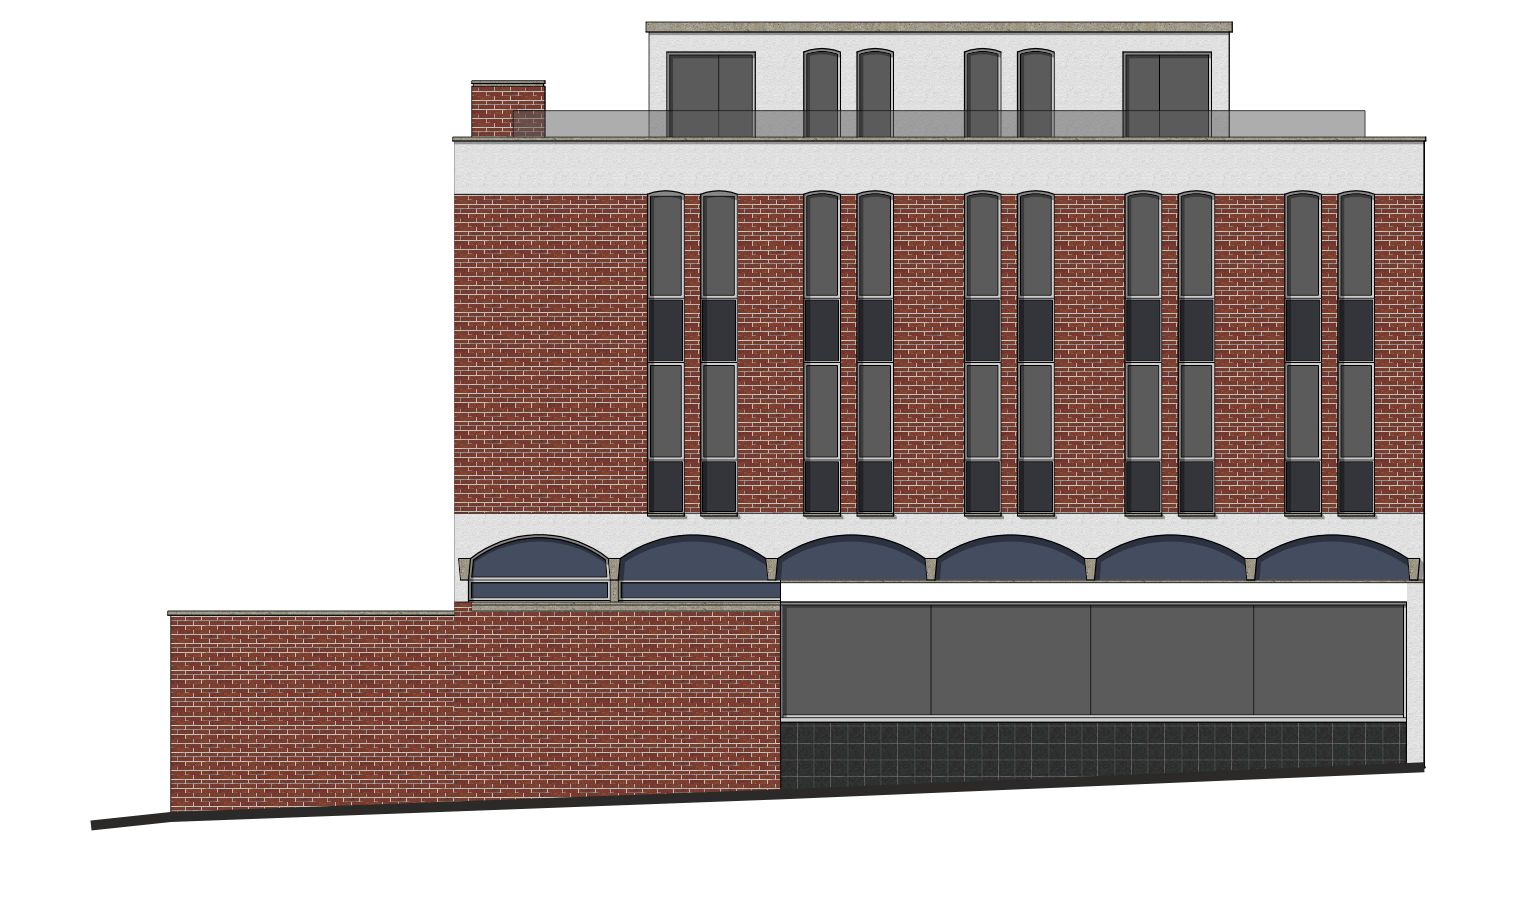 offices converted to flats prior notification proposed side drawings swindon planning application